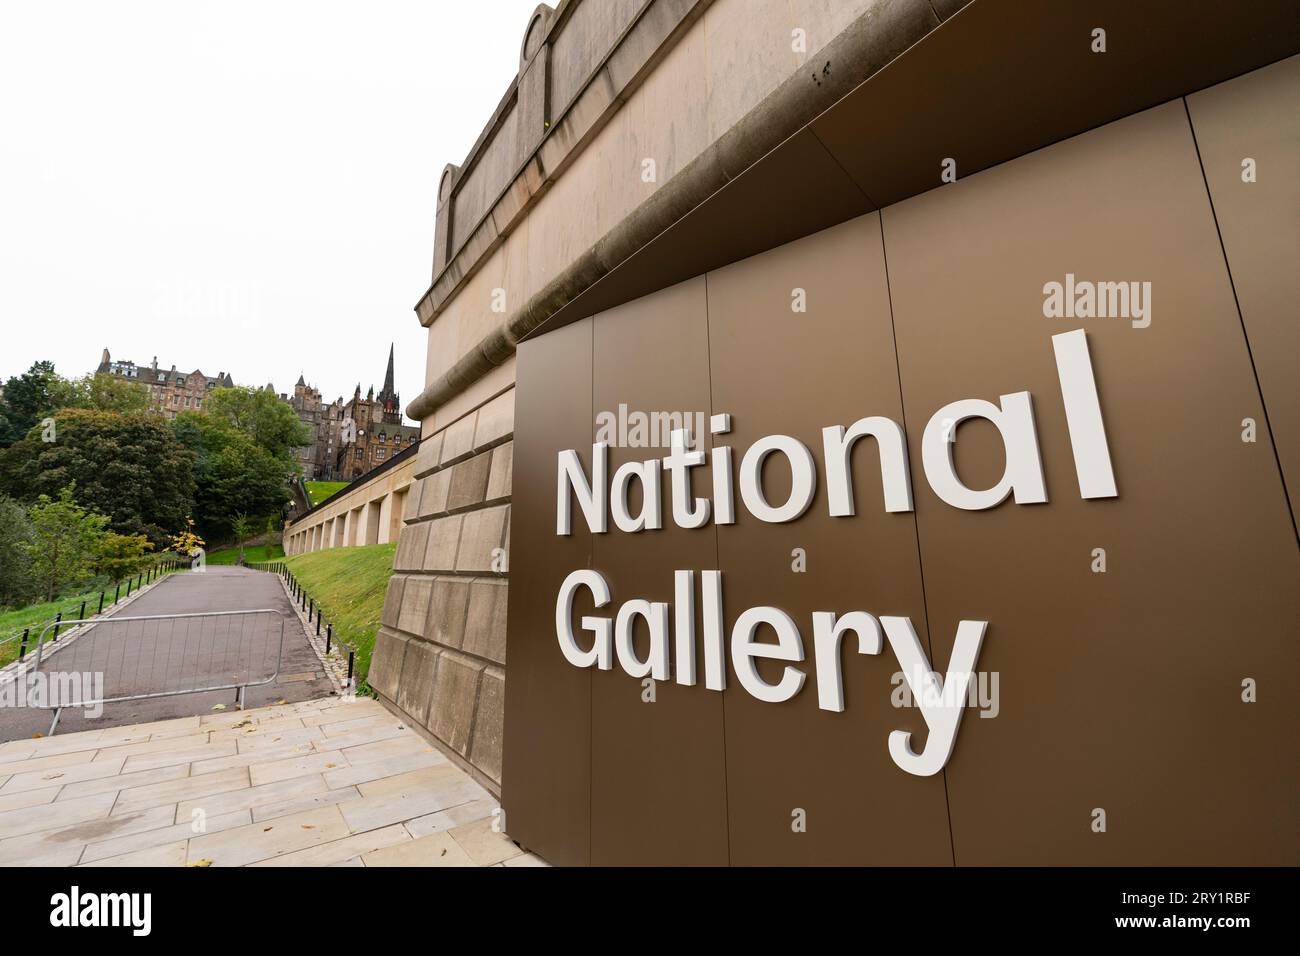 Edinburgh, Scotland, UK. 28th September 2023. The new wing of the National Gallery of Scotland, is formally opened today by Angus Robertson MSP accompanied by Director General of the Scottish National Galleries Sir John Leighton. The new extension opens after several years of problematic construction and cost overruns. The gallery showcases Scottish art from the mid 19th century to the 20th century. Pic; General view of exterior of new gallery entrance. Iain Masterton/Alamy Live News Stock Photo